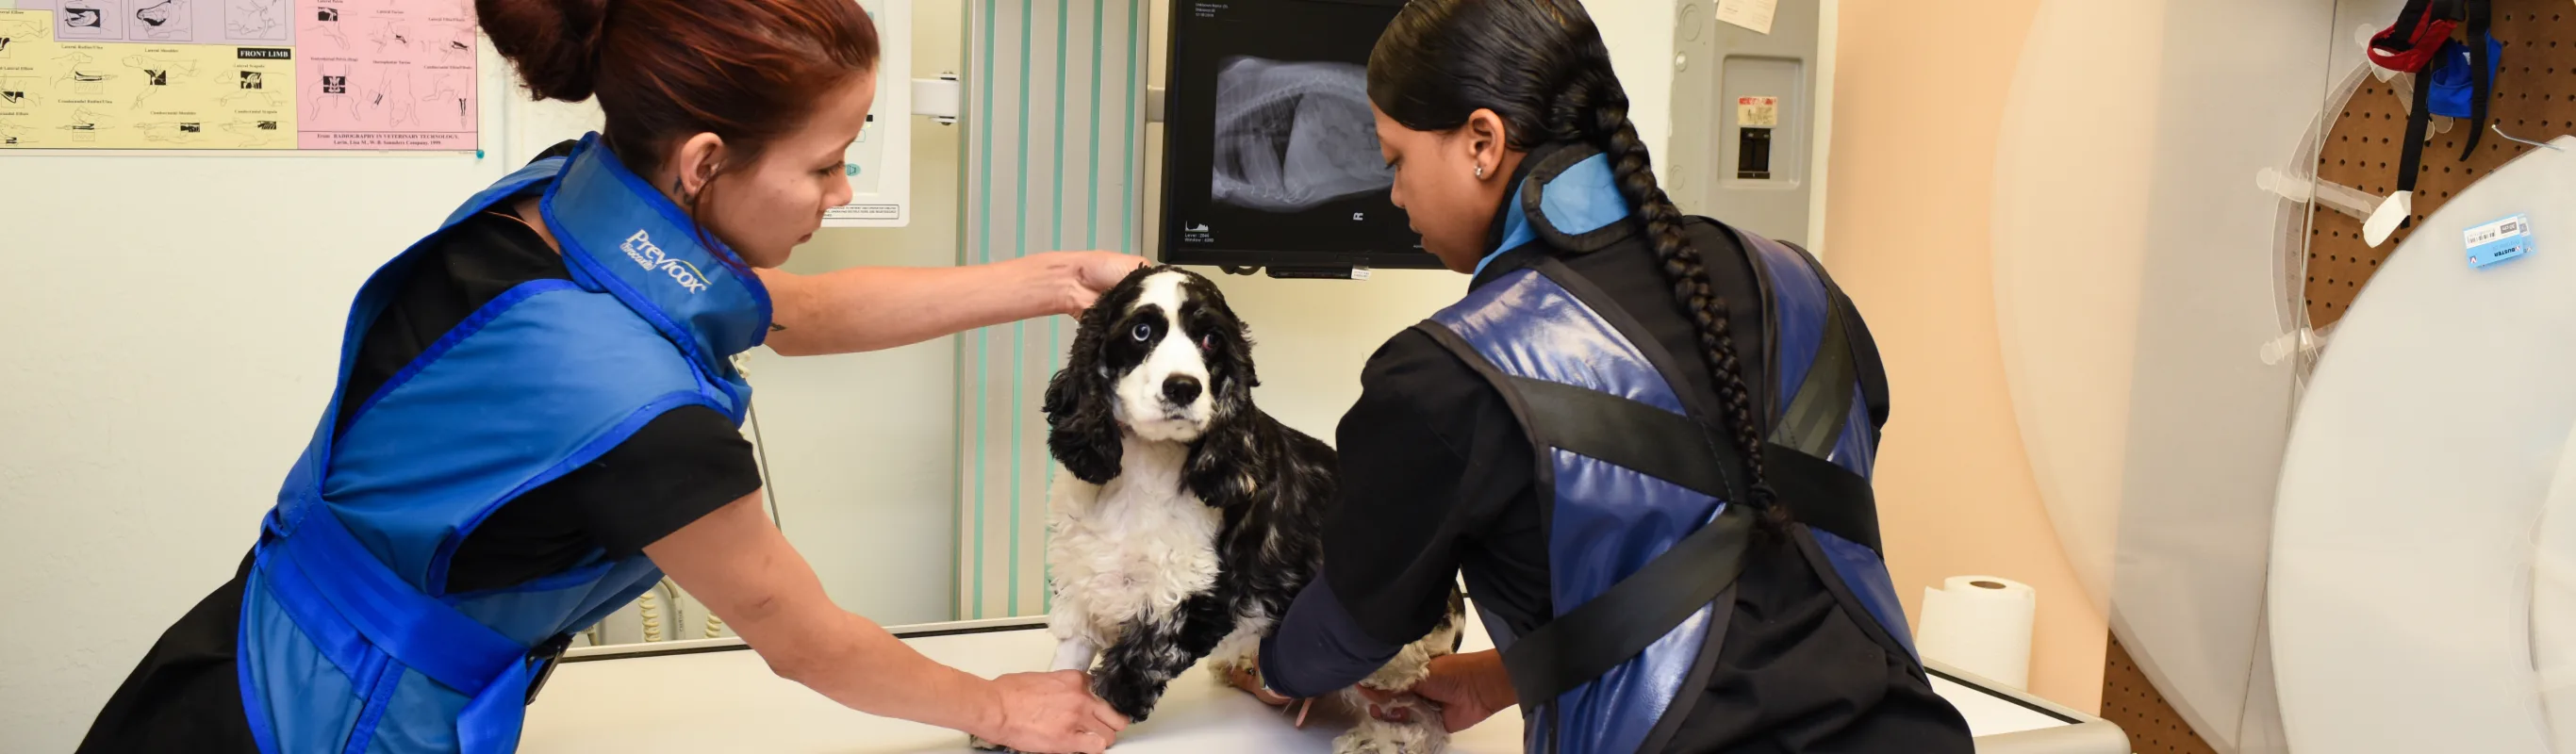 Dog receiving an x ray from two x ray technicians at Best Friends Animal Hospital.